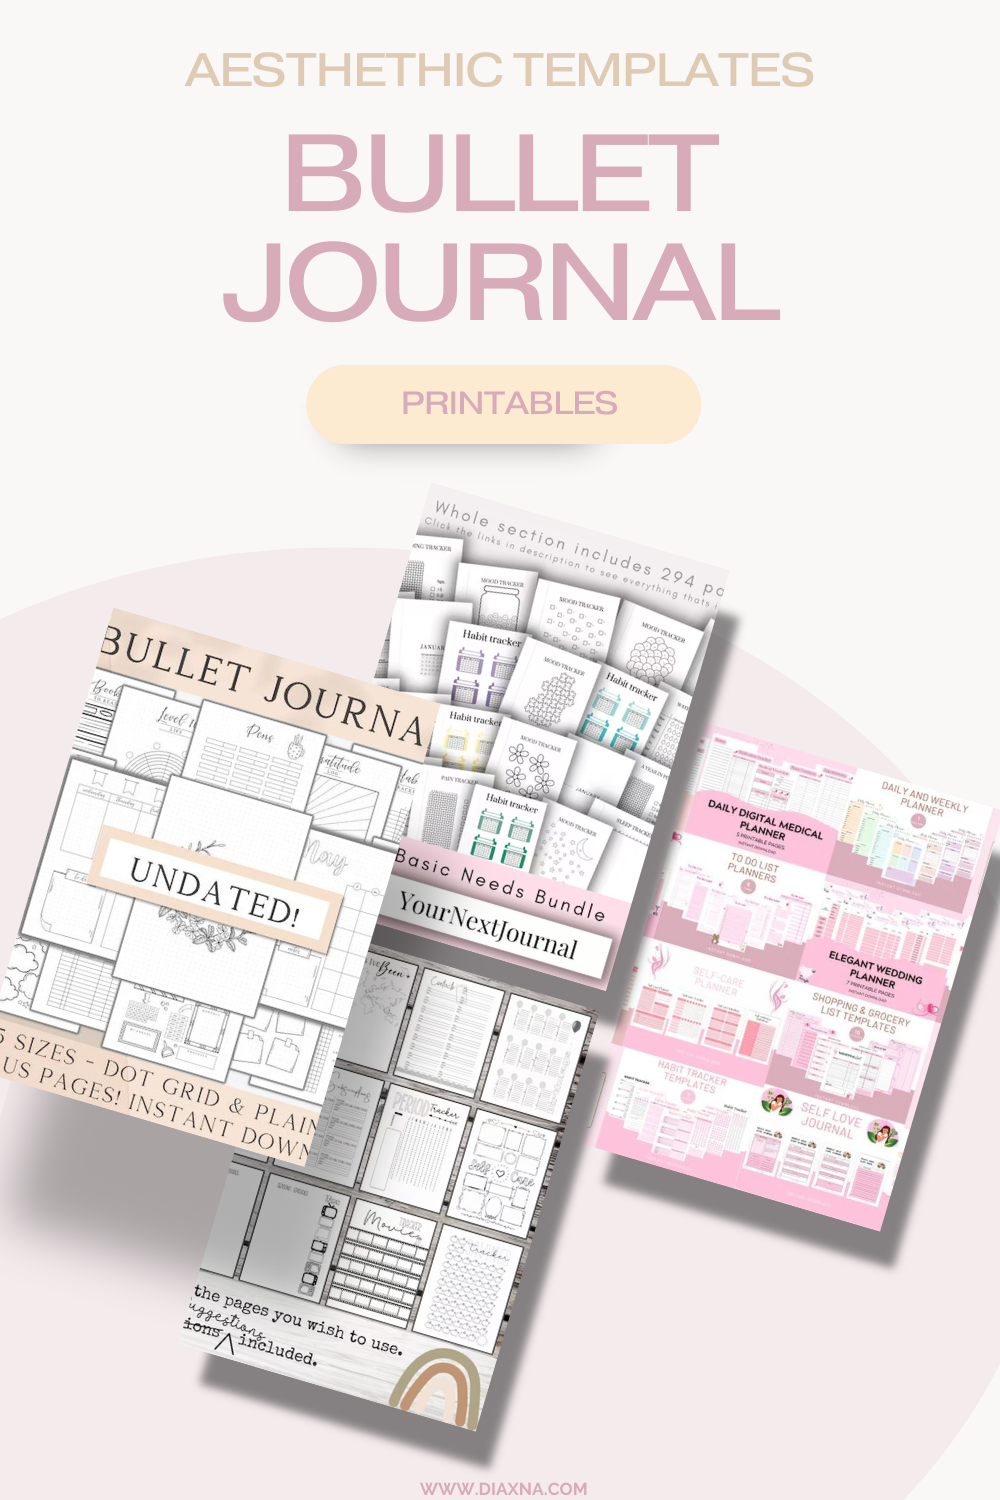 A5 Weekly Layout on 2 Pages - Bullet Journal Printable Template